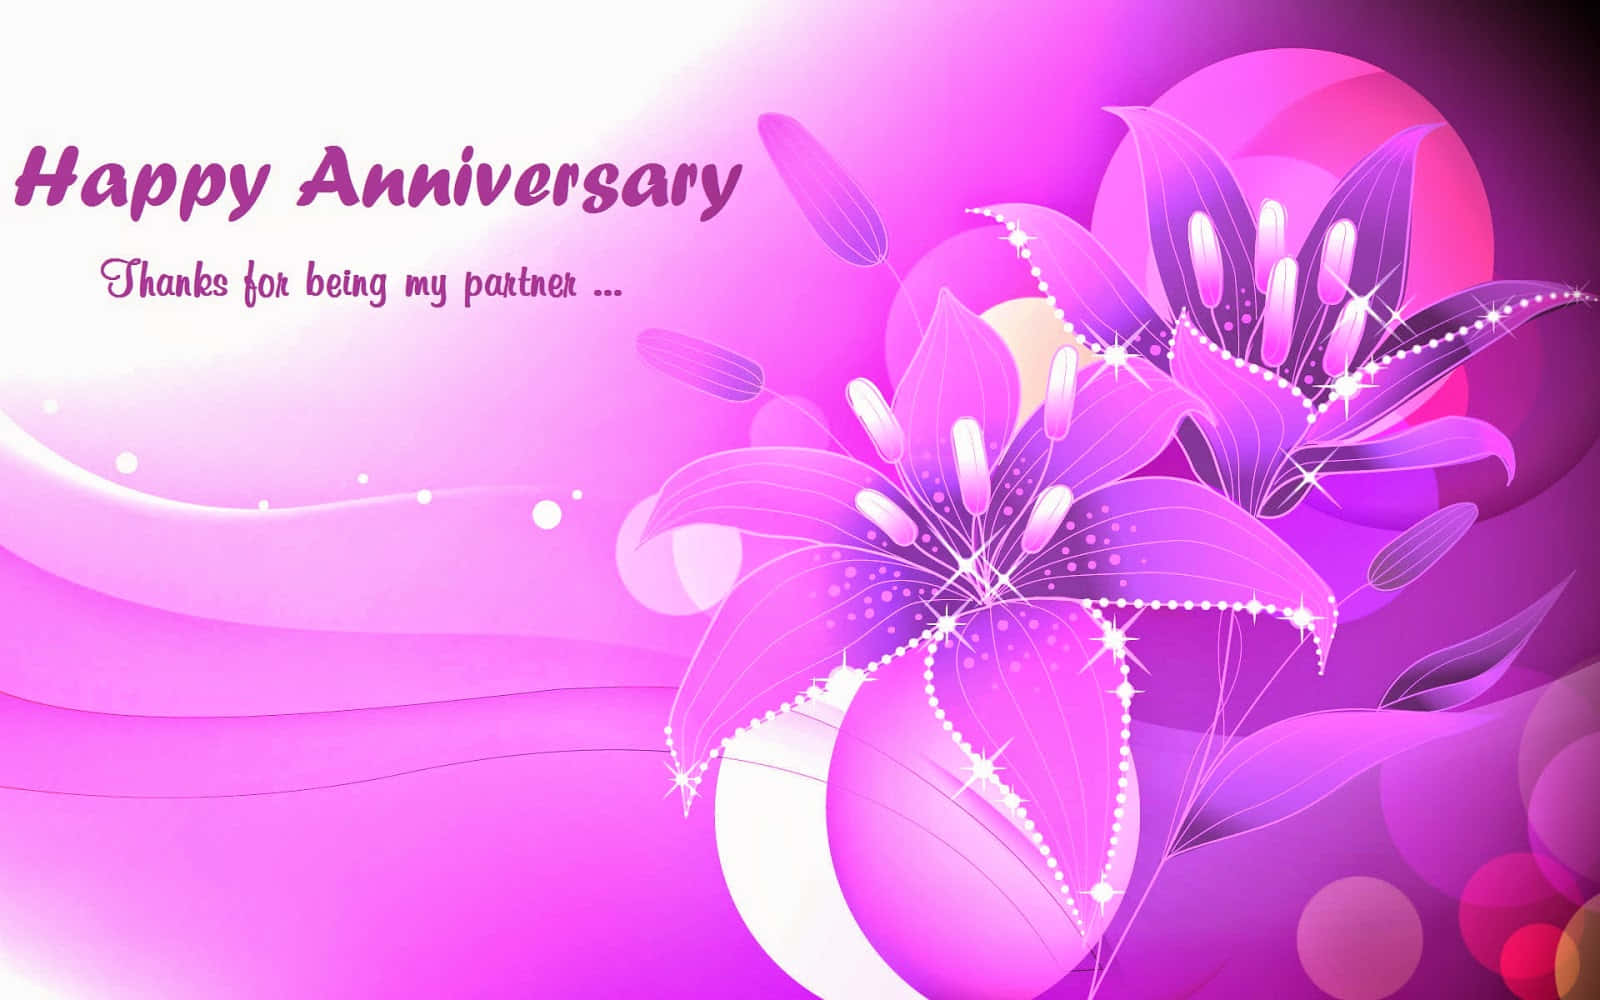 Caption: "Celebrating Love and Togetherness - Happy Anniversary" Wallpaper